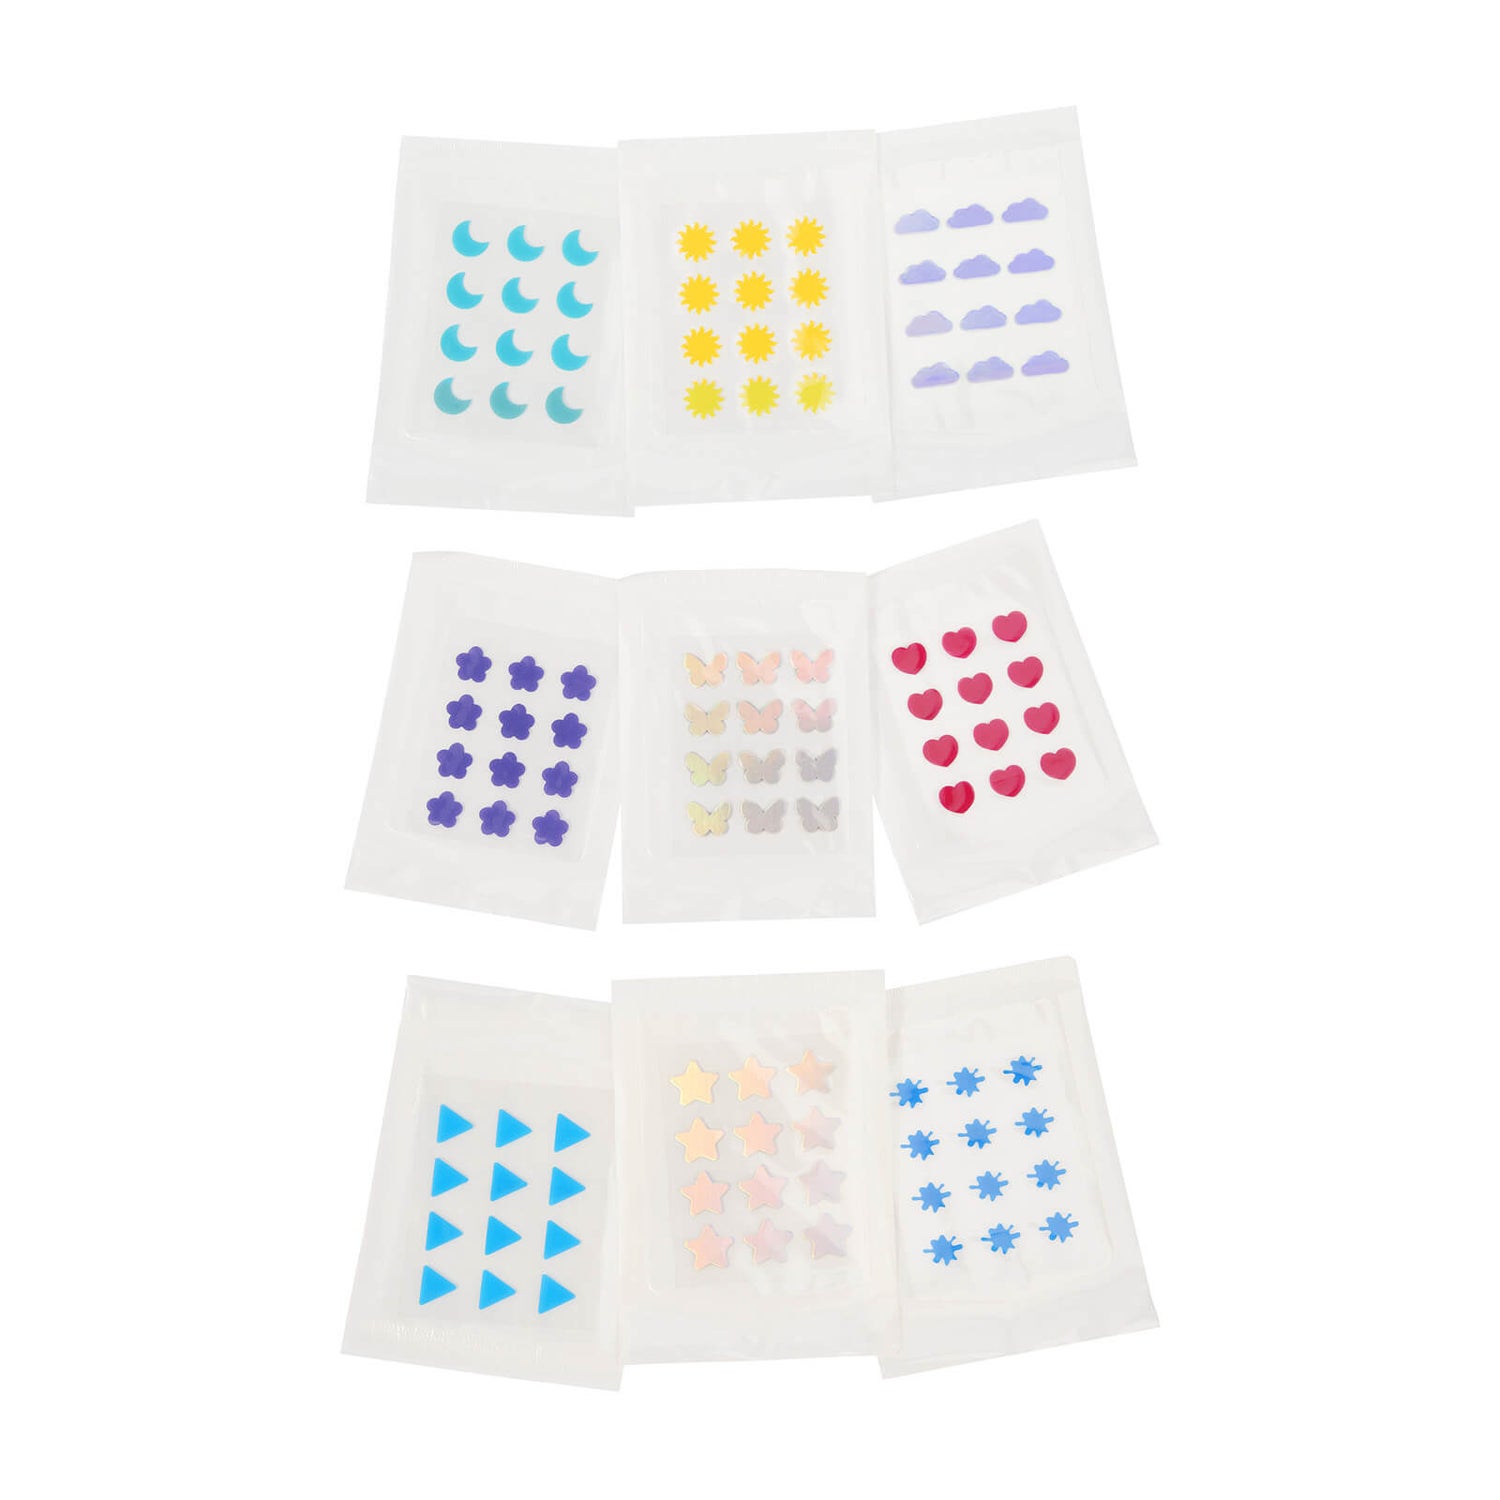 BH Cosmetics Acne Patch - Pimple Patches